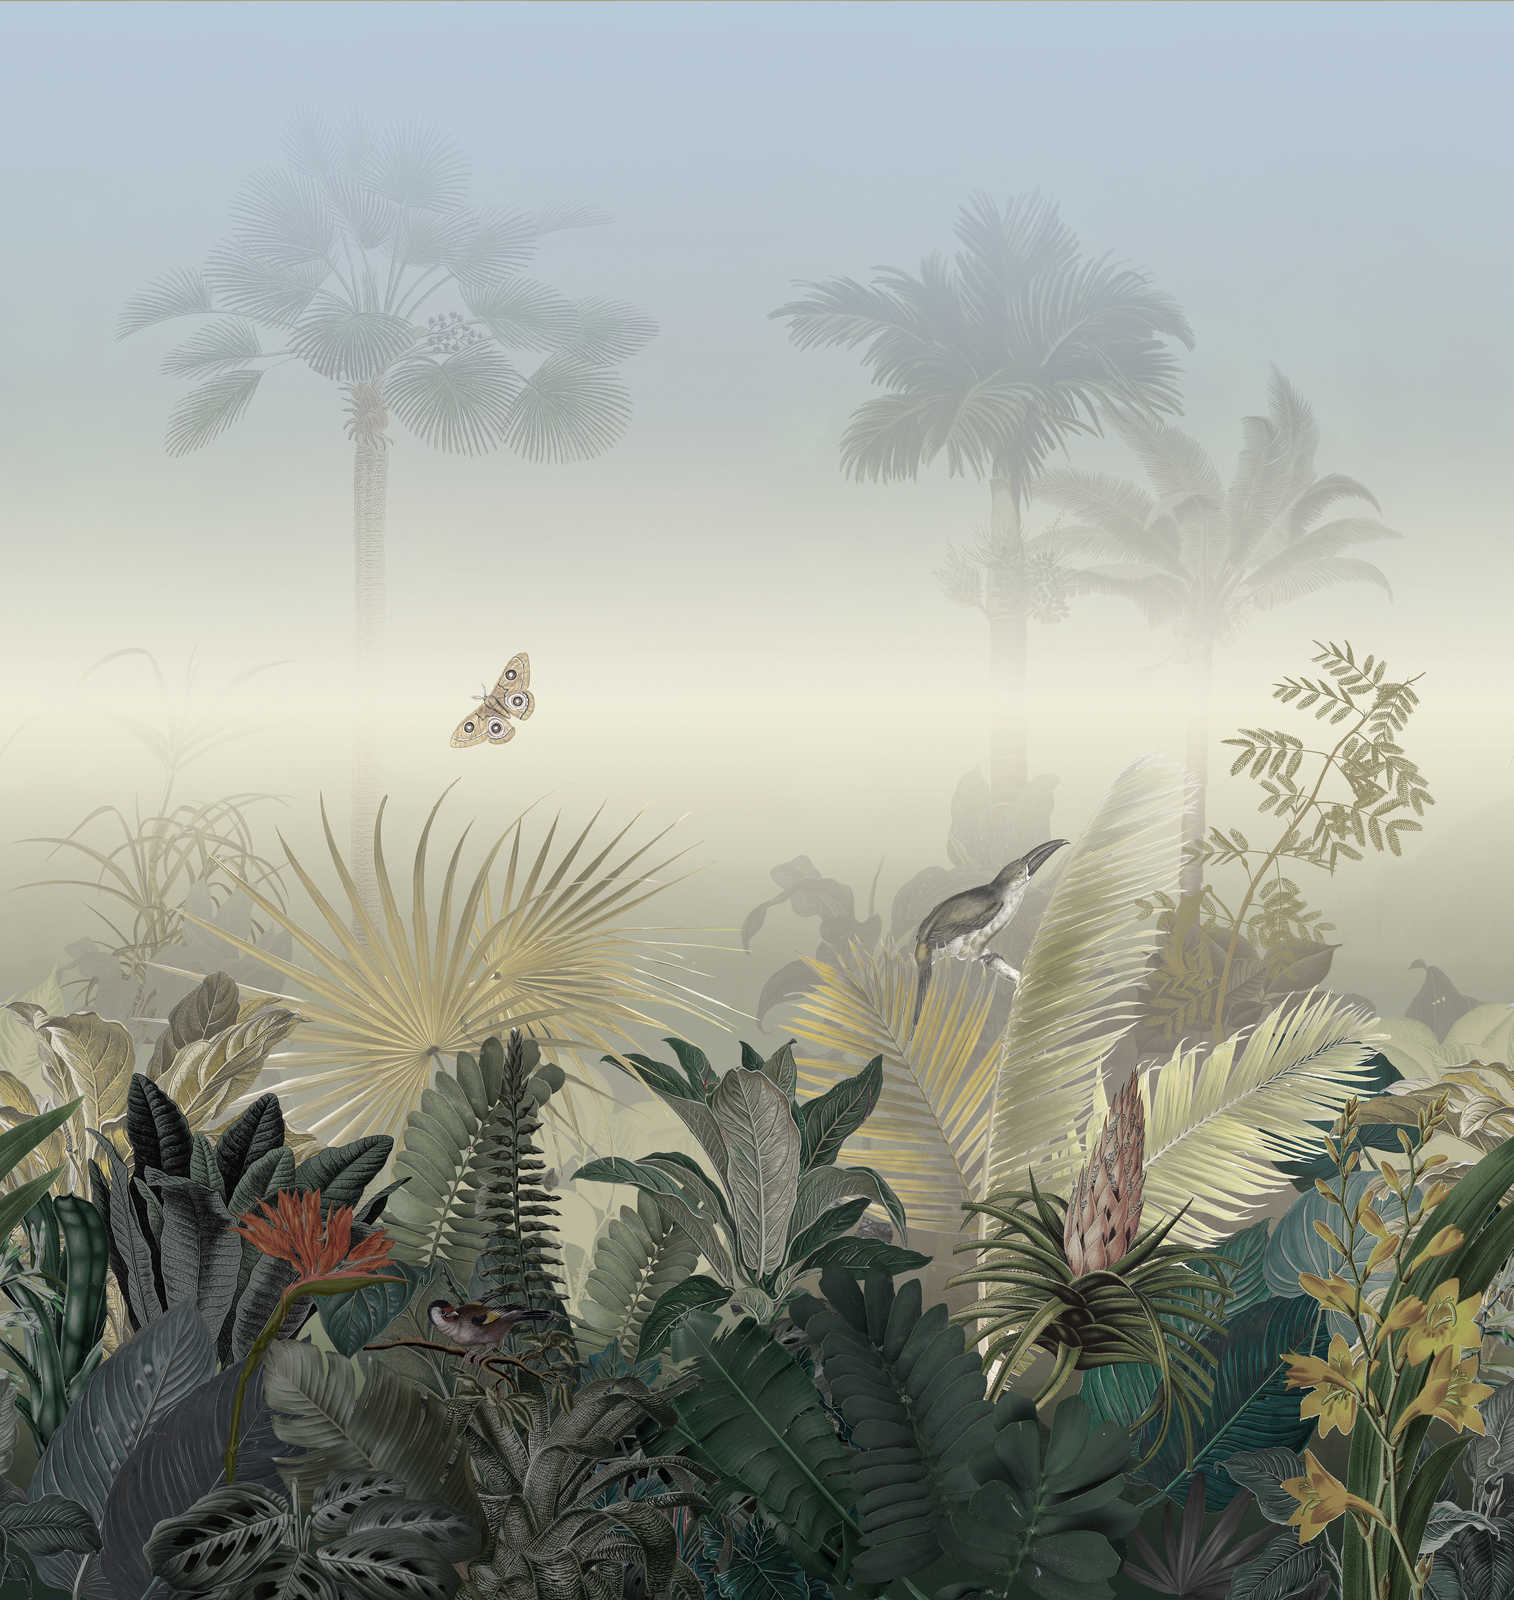             Jungle motif wallpaper with animals in the mist - colourful, blue, green
        